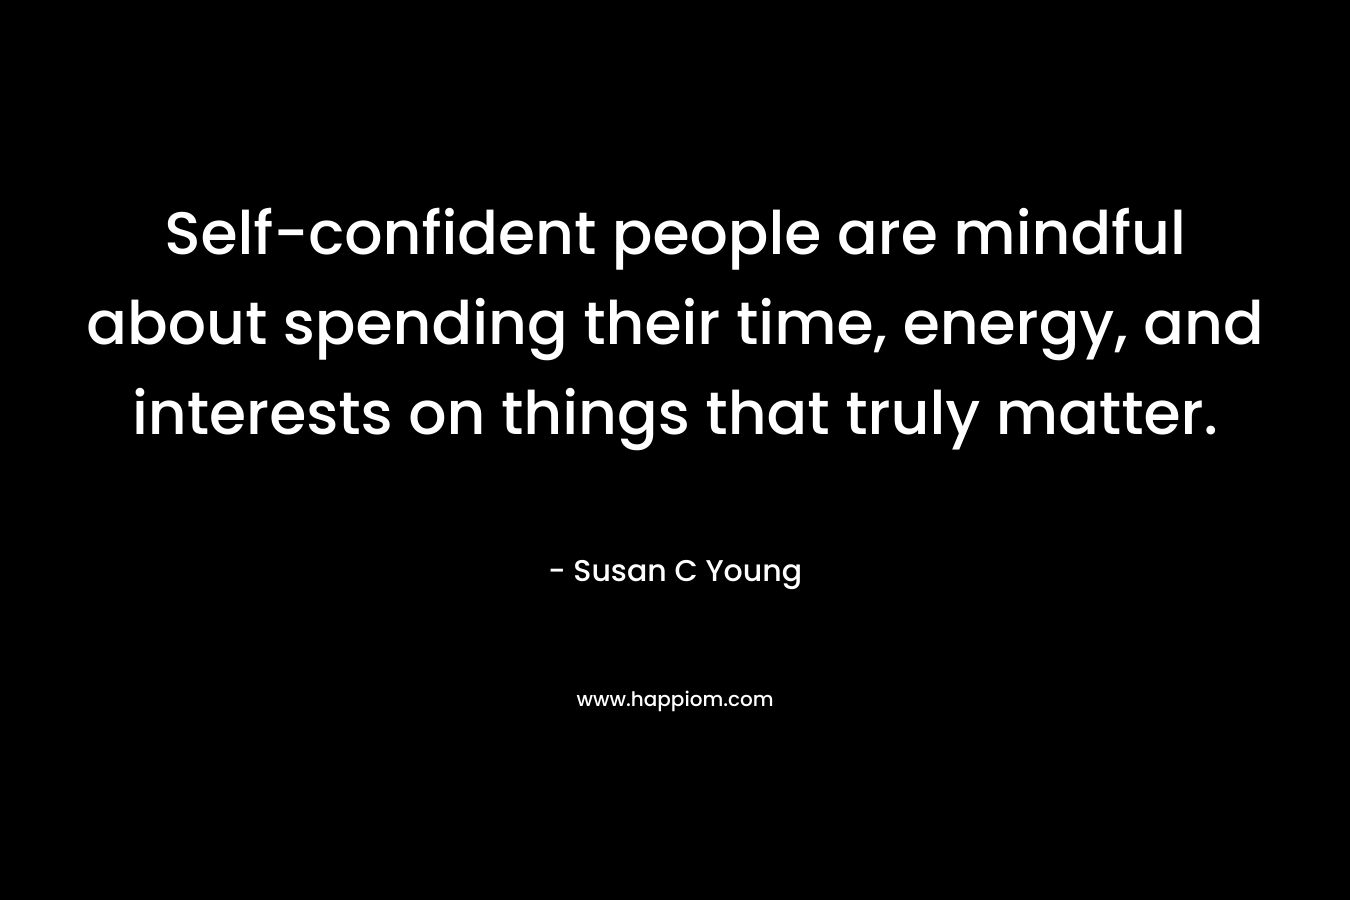 Self-confident people are mindful about spending their time, energy, and interests on things that truly matter. – Susan C Young